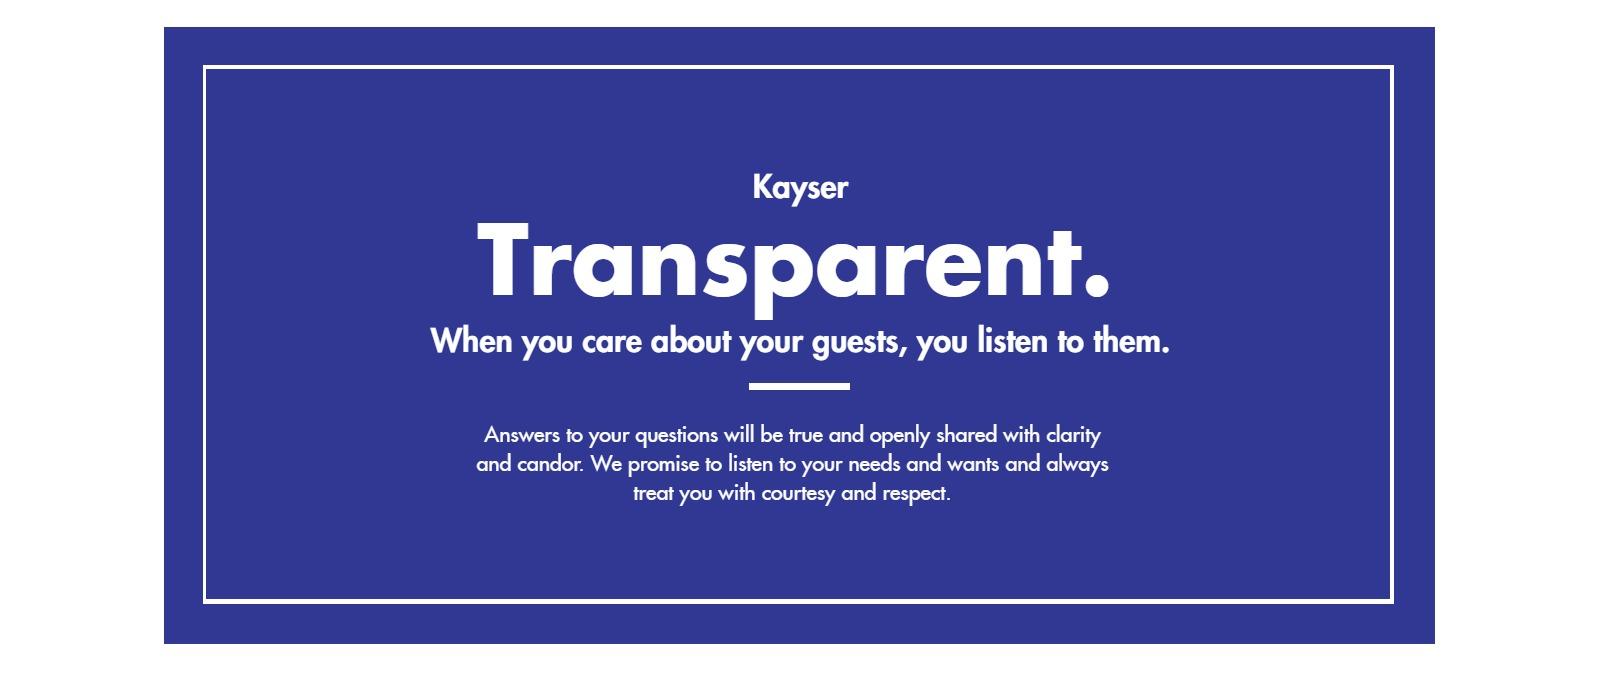 Kayser Transparent.
When you care about your guests, you listen to them.